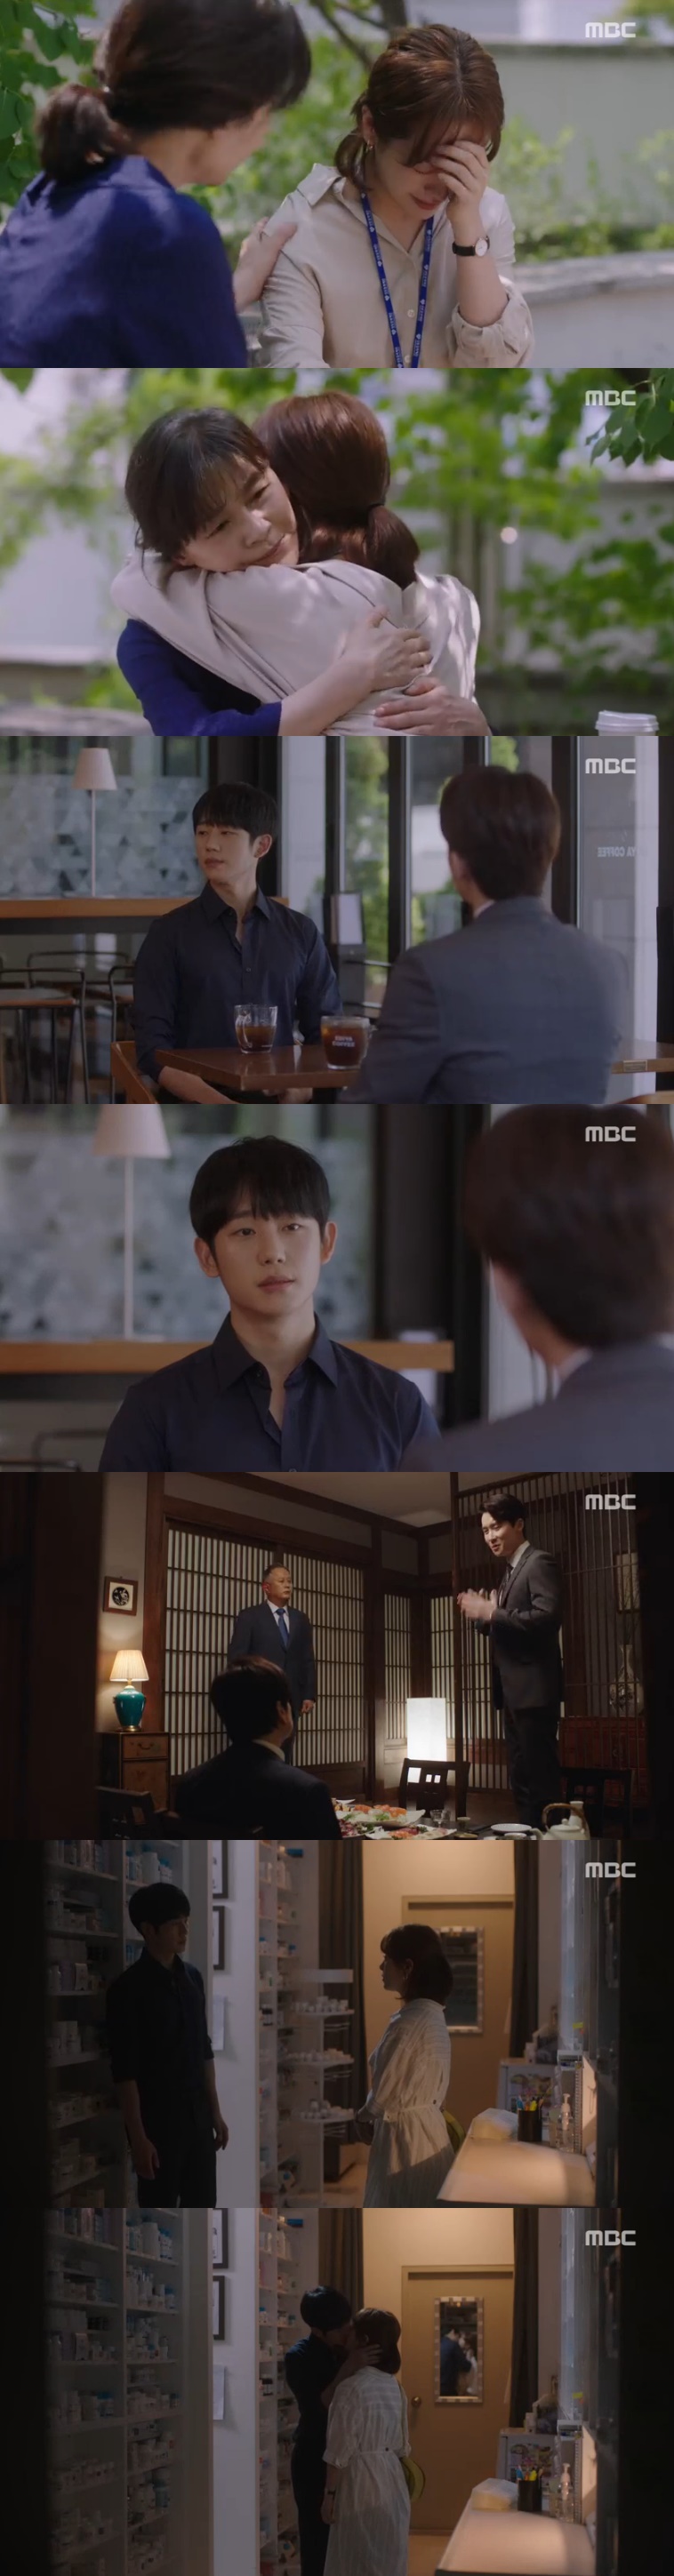 Han Ji-min, who hinted at a spring night breakup, has returned to Jung Hae-in.In the MBC drama Spring Night, which was broadcast on the afternoon of the 10th, Lee Choi Jung-in (Han Ji-min), who returns to Yoo JiHo (Jeong Hae-in), was portrayed.Yoo JiHo suddenly heard about his mother, Jung Eun-woo (Hian), and eventually showed anxiety about Choi Jung-in in the spirit of alcohol.Yoo JiHo told Choi Jung-in, Are you going to abandon us? If you do, its okay. Can I trust Choi Jung-in?Are you sure youll never change? asked Lee Jung-in, embarrassed. You dont trust me now? You think Ill change? Mr. JiHo, youre so drunk.Well talk again tomorrow, he said. But Yoo JiHo left, saying, I cant answer that ... I see.Lee Choi Jung-in hurriedly left Yoo JiHos house, and Yoo JiHos friend Park Young-jae (Lee Chang-hoon) chased Lee Choi Jung-in and said, Please understand JiHo.In fact, Jung Eun-woo mother, Jung Eun-woo said, trying to explain her mother. But Choi Jung-in said, Dont tell me.I dont want to hear it, he said, avoiding the position.Lee Jung-in was confused by the sudden attitude of Yoo JiHo, when Kwon Ki-seok (Kim Jun-han) was waiting in front of Lee Chung-ins house.Can I meet again? I betrayed once, and I can meet again. Can I believe it? What do you think? asked Lee Jung-in.Kwon shook Lee Jung-in, saying, I can believe it.The next day, Yoo JiHo asked the King Hyejeong (Seo Jeong-yeon) for advice; King Hyejeong said, There is also a human figure. Dont just want to understand.It is the worst selfishness of selfishness. Yoo JiHo, who met with Choi Jung-in after work, said, No matter how drunk you are, would you think of Choi Jung-in? Im sorry.I never thought of it for a second. Choi Jung-in said, Ive never imagined it. But I asked, Are you going to throw it away?The frank feeling I received was Choi Jung-in was not the same.I didnt think that JiHos wound would be easily removed. Yoo JiHo said, Im really not a Memory. So I cant apologize or excuse.I just think Ill make a misunderstanding. He persuaded me, I can not be qualified as Choi Jung-in said. Ive dumped the guy I was seeing, so Im qualified, said Lee Jung-in, who said, Im the guy who pushed this Choi Jung-in out of my mind.Does it make sense that you suspected such a person? Confessions. Lee Jung-in said, I suspect me.I think I jumped without preparation because I was so greedy. Lee Choi Jung-in said, Not because of Mr. JiHo. I thought love would be all. But Mr. JiHos past is so strong.I still have not enough heart, he said. I need time to think, he said. Im sorry.Yoo JiHo stared at him as he tried to leave and said firmly, Ill tell you exactly what Im thinking: Dont throw us away.Yoo JiHo went to the Choi Jung-in house after breaking up with Choi Jung-in, but he took a call from Jung Eun-woo, Dad come home soon.Meanwhile, Kwon Young-guk (Kim Chang-wan) offered Kwon a position to stand. Kwon Ki-seok replied, Not yet, but there is nothing I cant meet.Shin (Gil Hae-yeon) came to Choi Jung-in and said, What if your life is so happy? There are still many mountains to overcome. Marriage is not all. Its harder.I can have a moment of regret, Lee Jung-in said. Choi Jung-in burst into tears. I know youve been suffering a lot.Im not done with my mothers permission, he said.Choi Hyun-soo (Lim Hyun-soo) called Yoo JiHo and said, Is it over with Choi Jung-in? Does Kwon Ki-seok know?Yoo JiHo asked Kwon Ki-seok, How do you disappear from this Choi Jung-in life? Kwon Ki-seok replied, If you give up, I will give up.Yoo JiHo asked, Do you think Ill meet if I give up?Kwon said, Whos meeting? You know. My goal is Yoo JiHo. Choi Jung-in comes. Were married. Parents are waiting.You dont know Choi Jung-in. You cant handle it. Your cheap romance doesnt fit this Choi Jung-in. Youre unscrupulous.This Choi Jung-in made me do this. Im this bad. Im sorry. You can see the future.Yoo JiHo said, If you are really worried, I will be grateful. I am not warning you from now on. It is a threat. He said, If you are a good head, I will remember.Im telling you, if its a child, theres nothing to be afraid of. Whats the film about me and my son, Illegal?He even said that his father shot it, he said, referring to a picture of Jung Eun-woo (Highian) taken by Kwon Ki-seok and Kwon Young-guk as Illegal.Ive been patient with Mr. Choi Jung-in. Theres nothing to be afraid of. Im afraid youve touched my child.Kwon Ki-seok left the table and made a meal with Kwon Young-guk and Lee Tae-hak (Song Seung-hwan). Kwon Ki-seok asked Kwon Young-guk to take the position of Lee Tae-hak as director.When Yoo JiHo returned to the pharmacy, Lee Jung-in was waiting.Lee Jung-in was angry, saying, I want to squeeze one and give me the medicine I want to eat when I feel sick. Yoo JiHo kissed him like that.On the other hand, Spring Night is broadcast every Wednesday and Thursday at 10 pm.Photo  MBC Broadcasting Screen